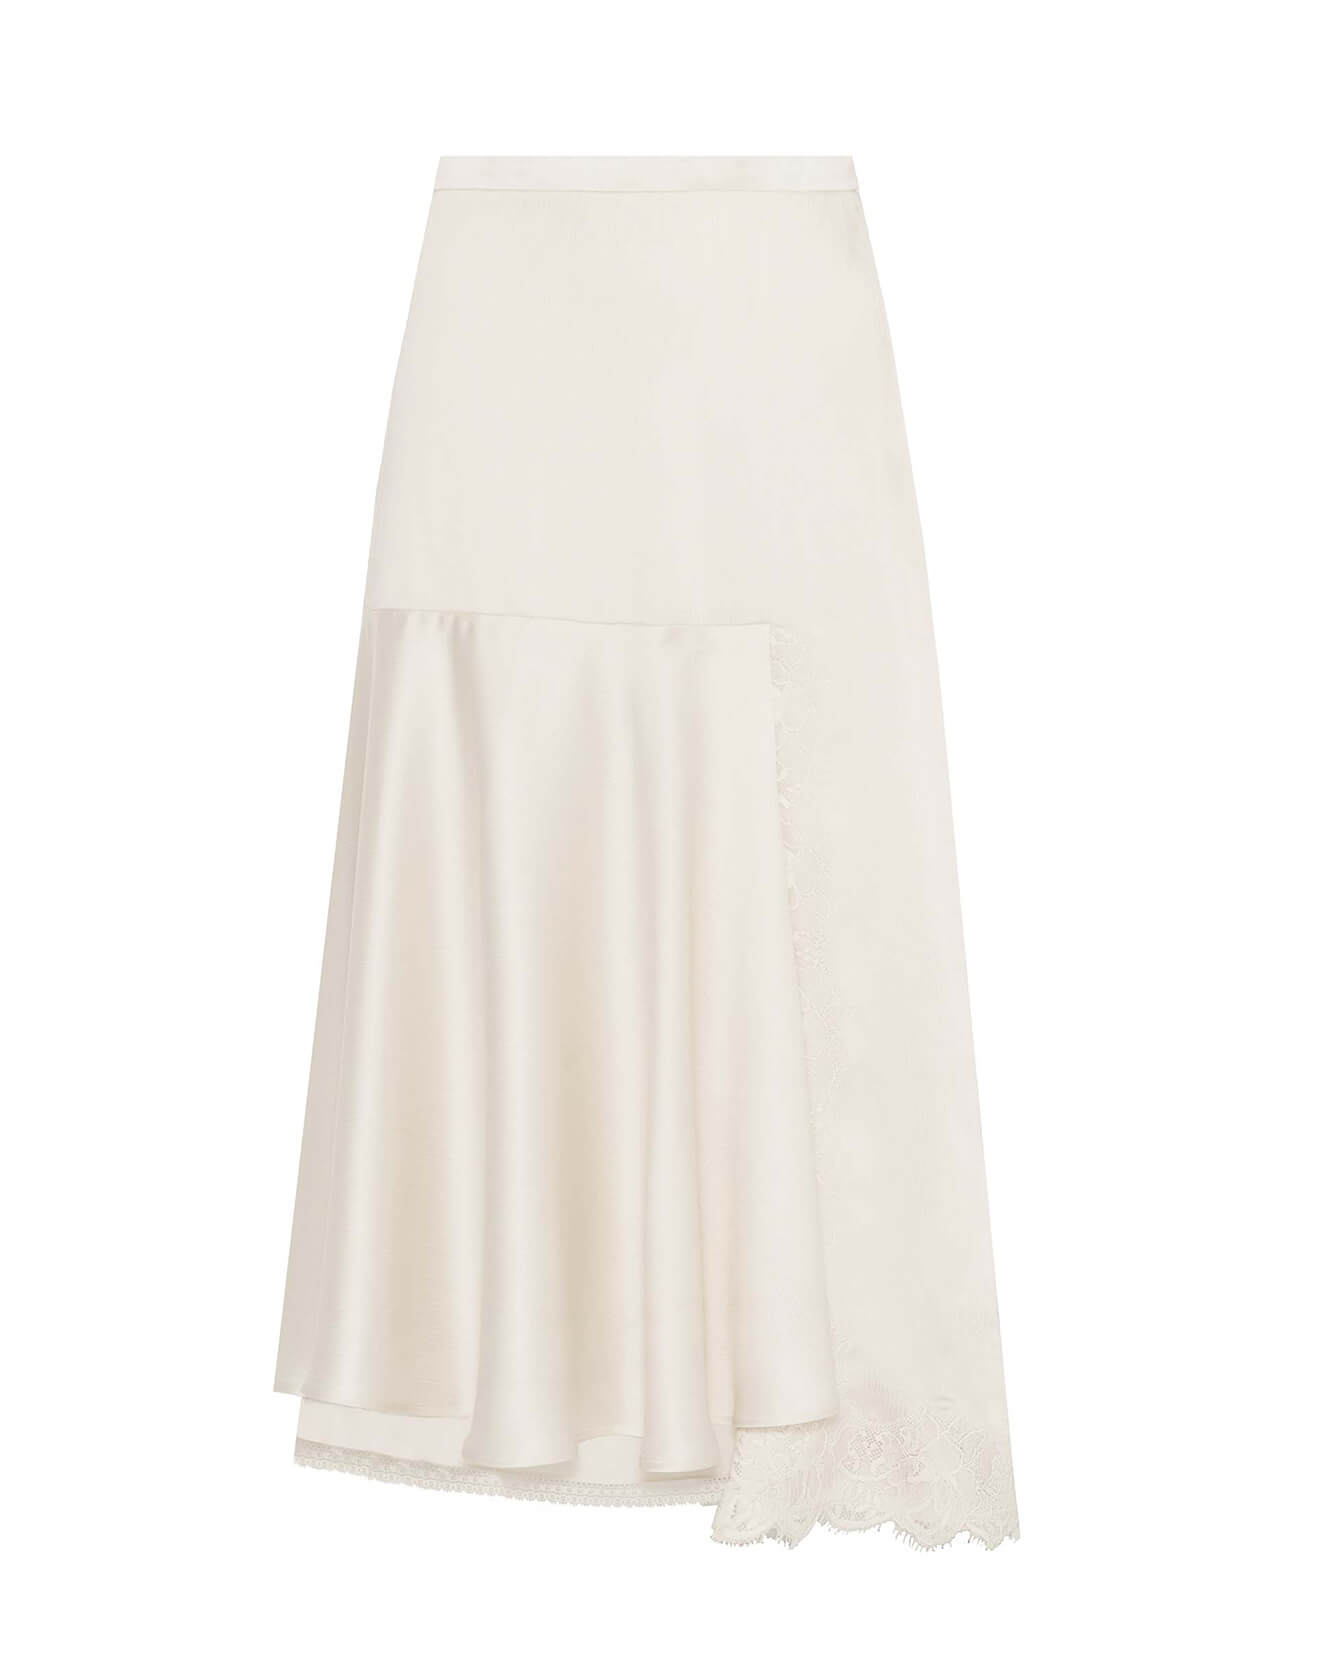 crepe satin skirt with lace